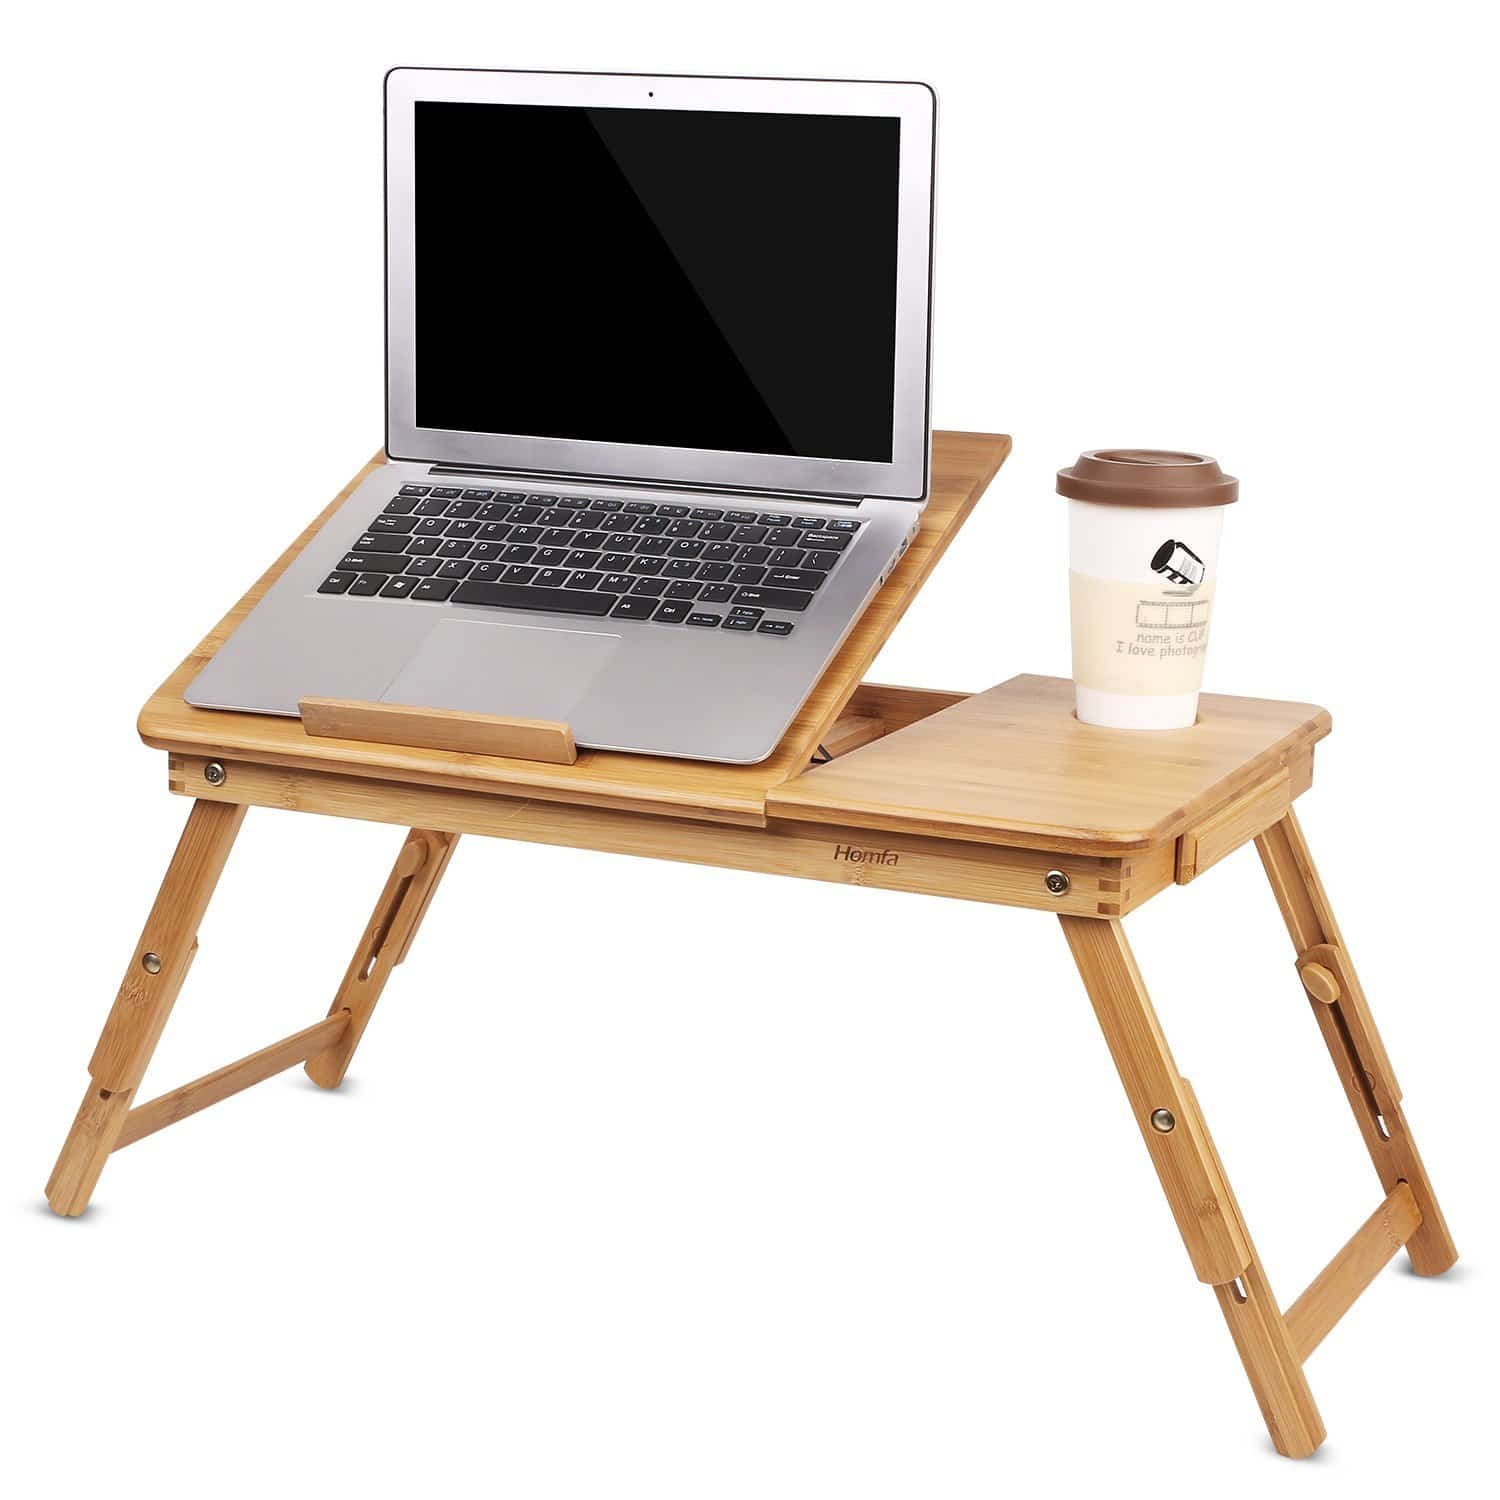 The HOMFA Bamboo Laptop Desk and Breakfast Serving Tray (with a tilting top drawer)